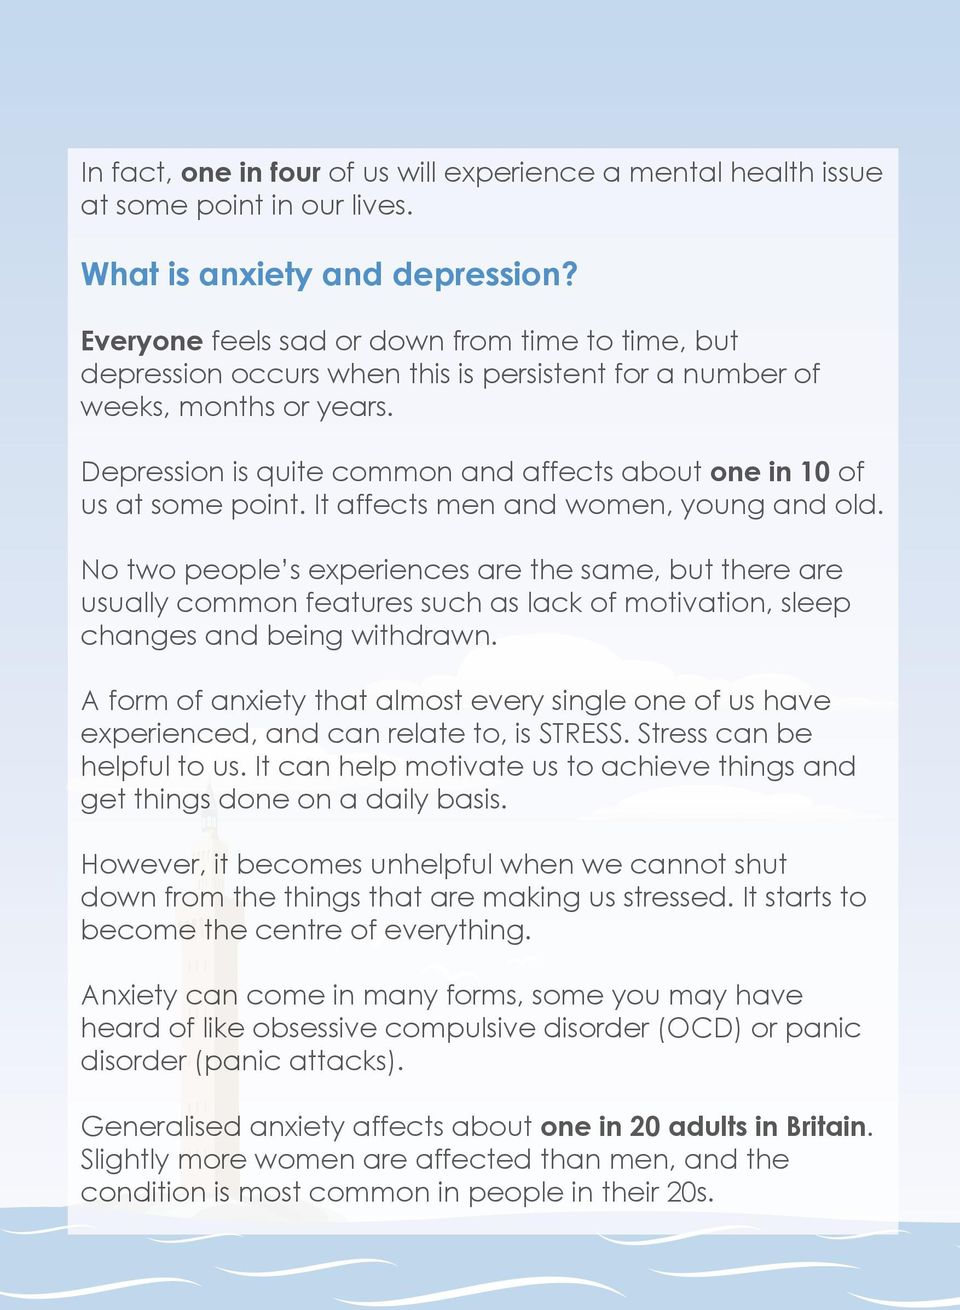 Depression is quite common and affects about one in 10 of us at some point. It affects men and women, young and old.